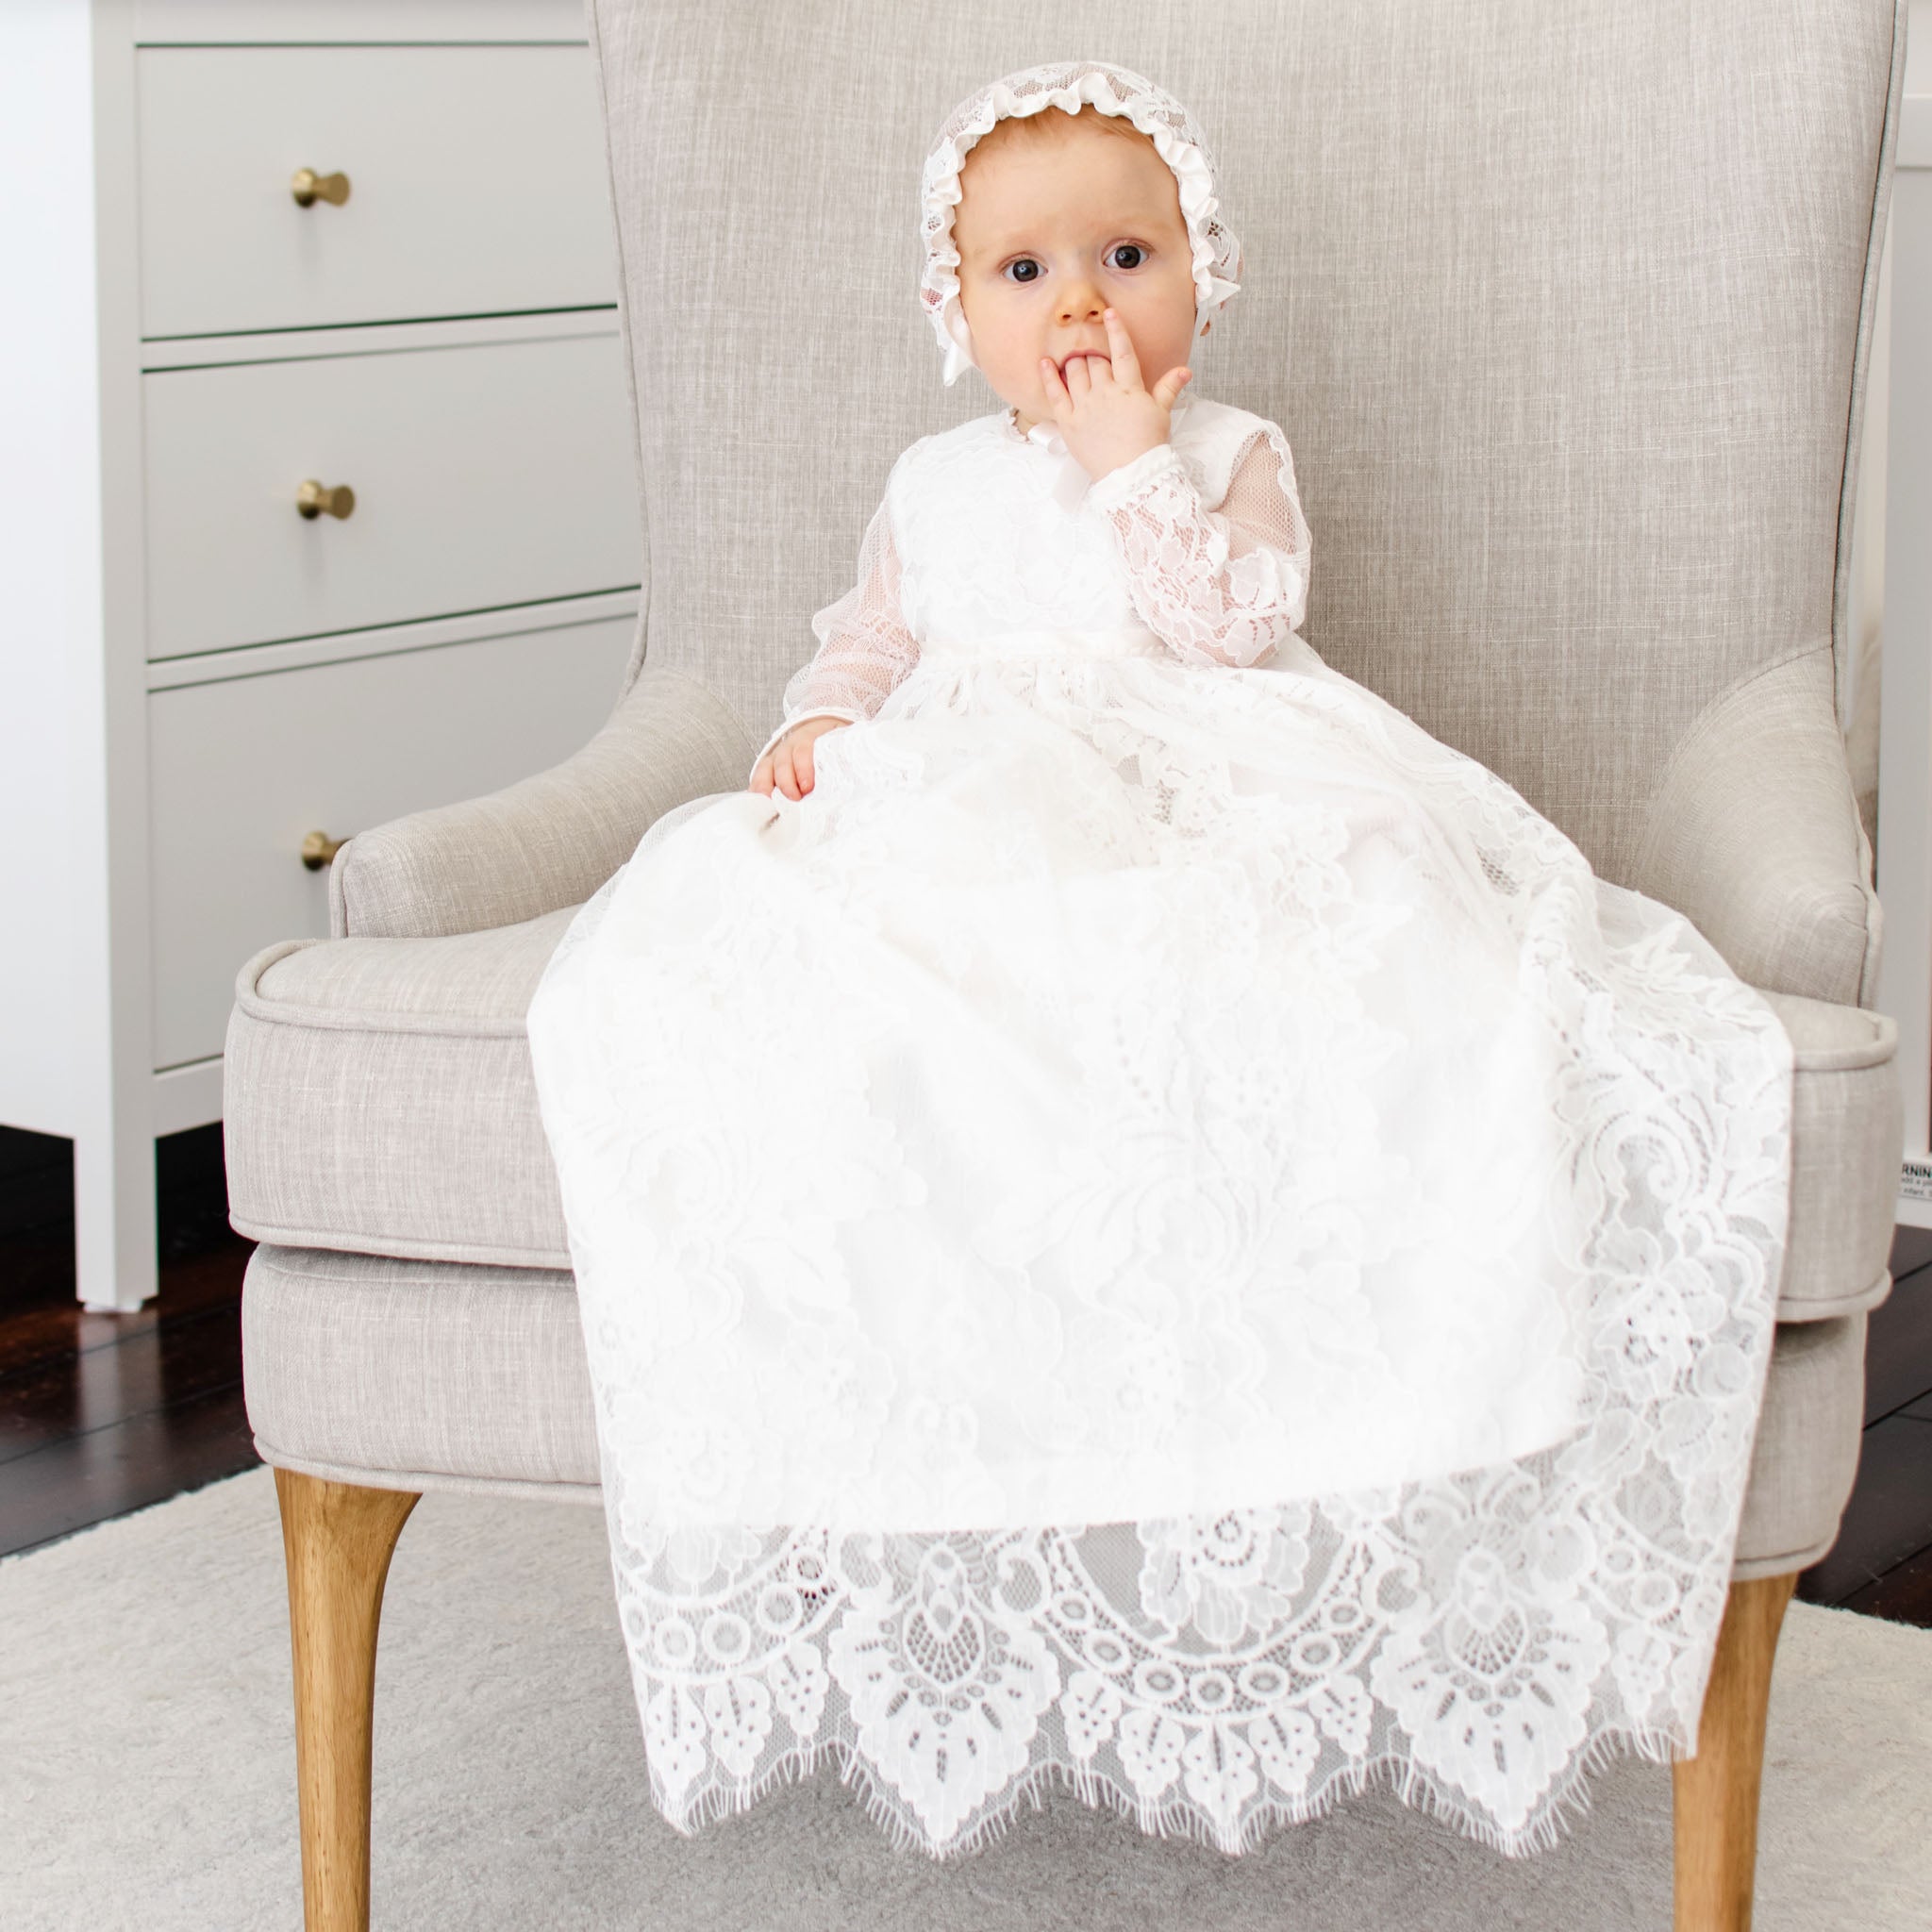 hand embroidered christening gown,heirloom christening gowns,winter  christening gown,long sleeved christening gown,batiste embroidered  christening gown,infant christening gowns,baby christening gown,baby girl christening  gowns,christening gowns for ...